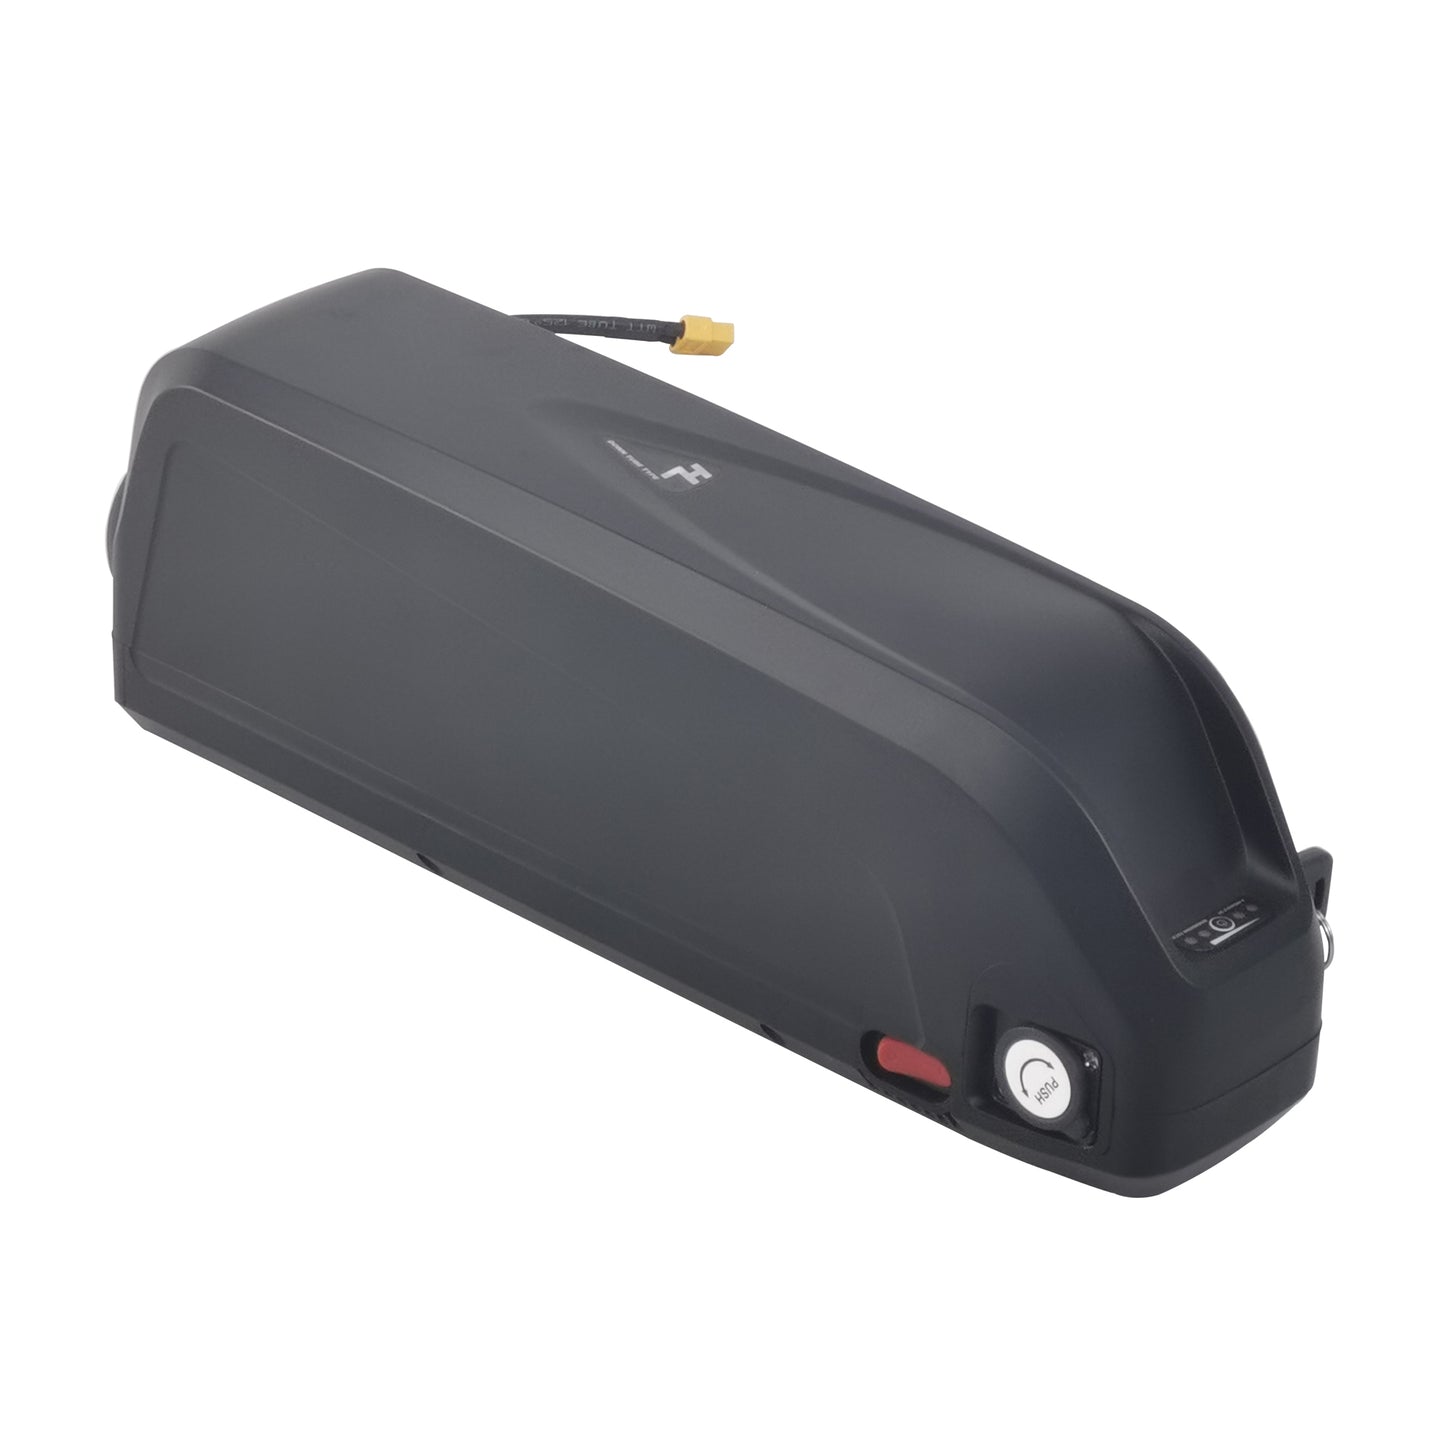 UK stock 52V20Ah  Hailong ebike battery LG21700 A grade cell 50A BMS support 2000W motor included 4A charger